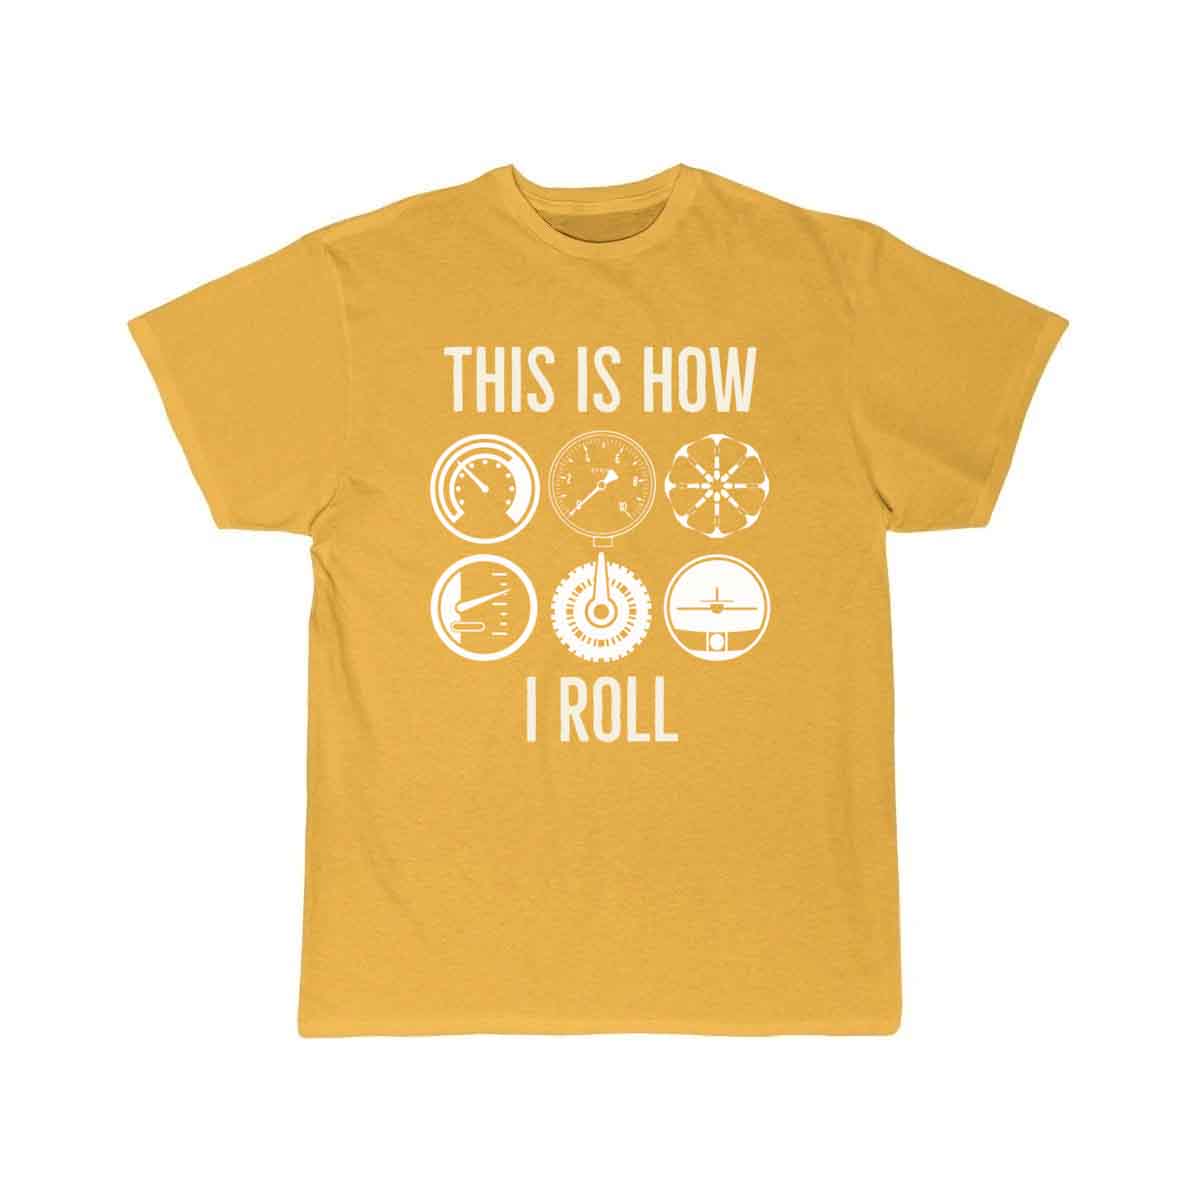 This is how we roll T SHIRT THE AV8R